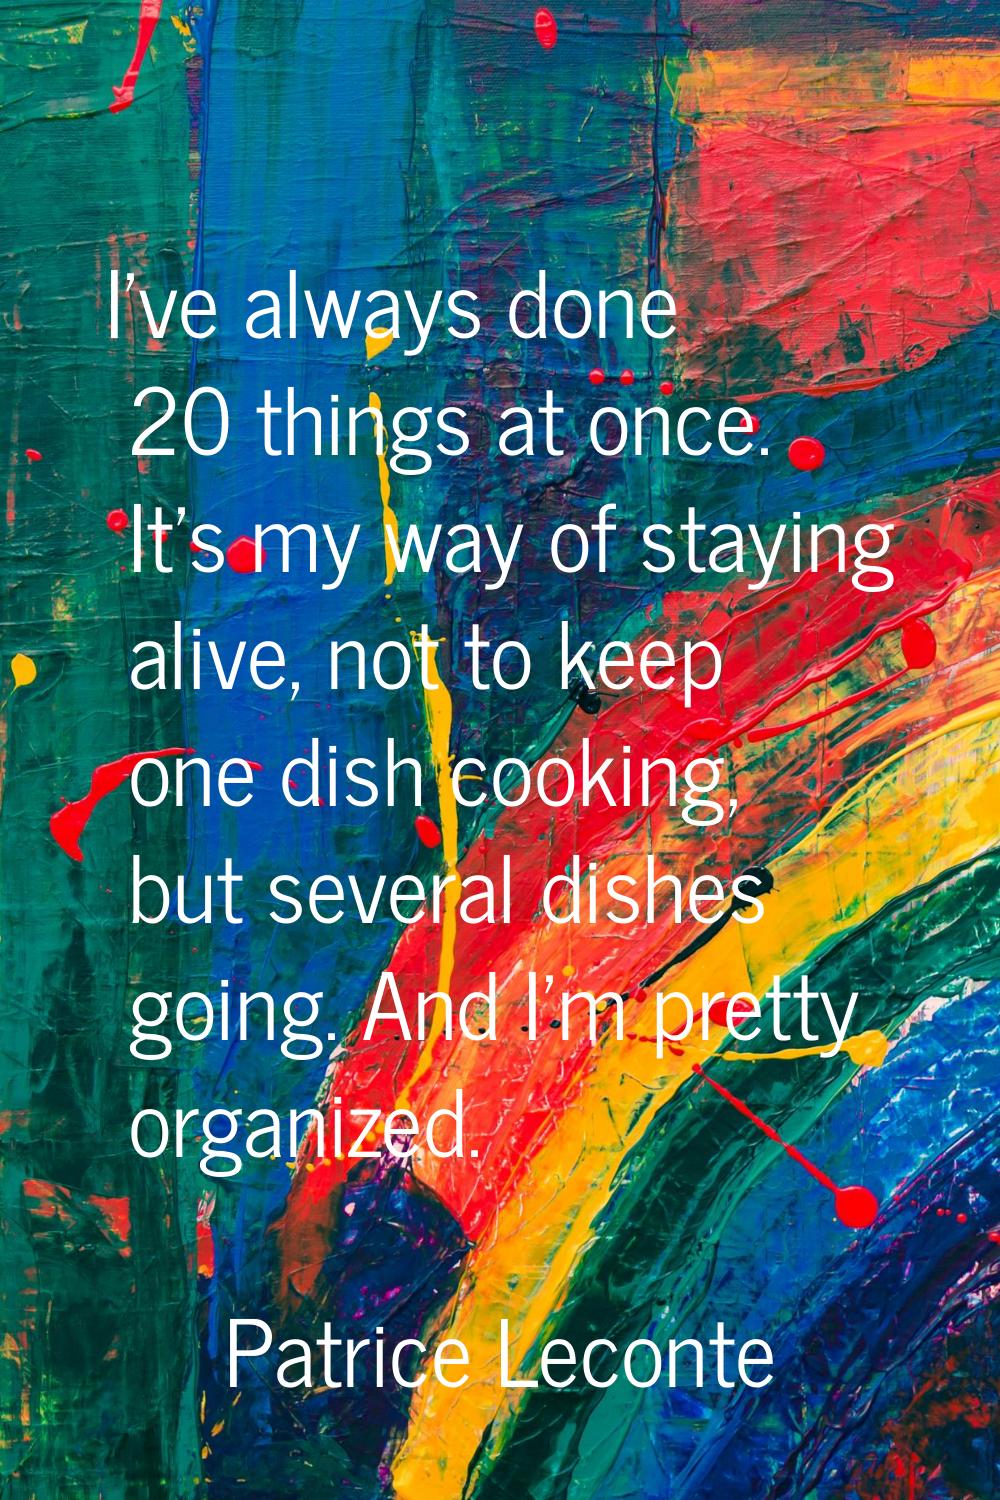 I've always done 20 things at once. It's my way of staying alive, not to keep one dish cooking, but